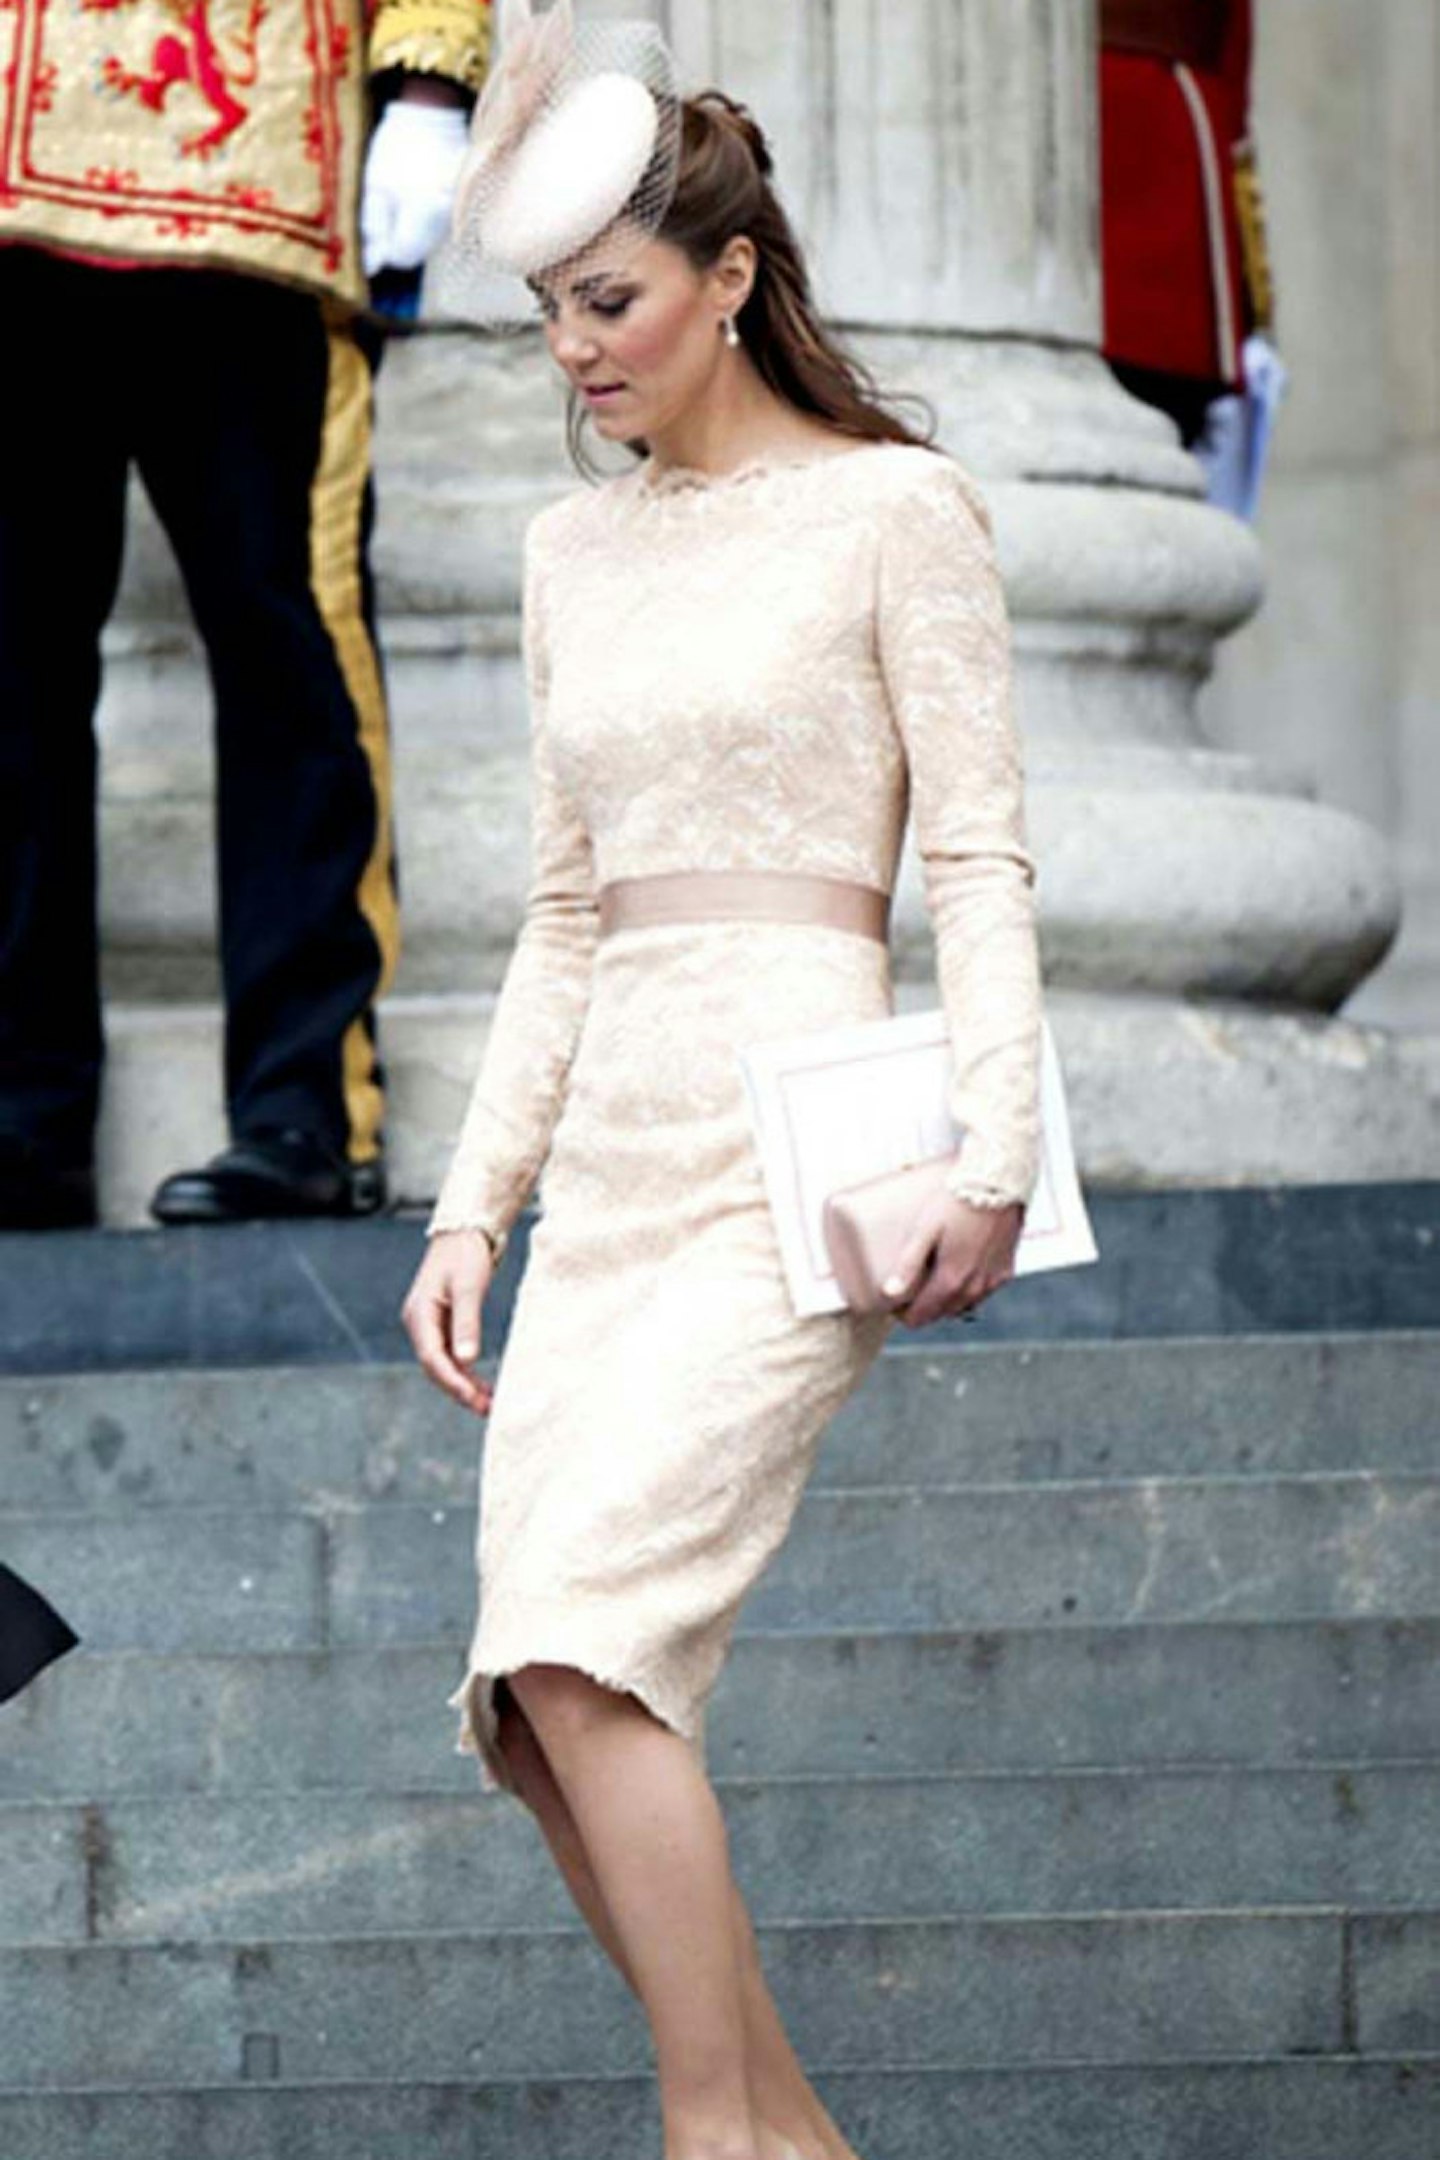 Kate Middleton Celebrating The Queen's Diamond Jubilee At St. Paul's Cathedral, 5 June 2012